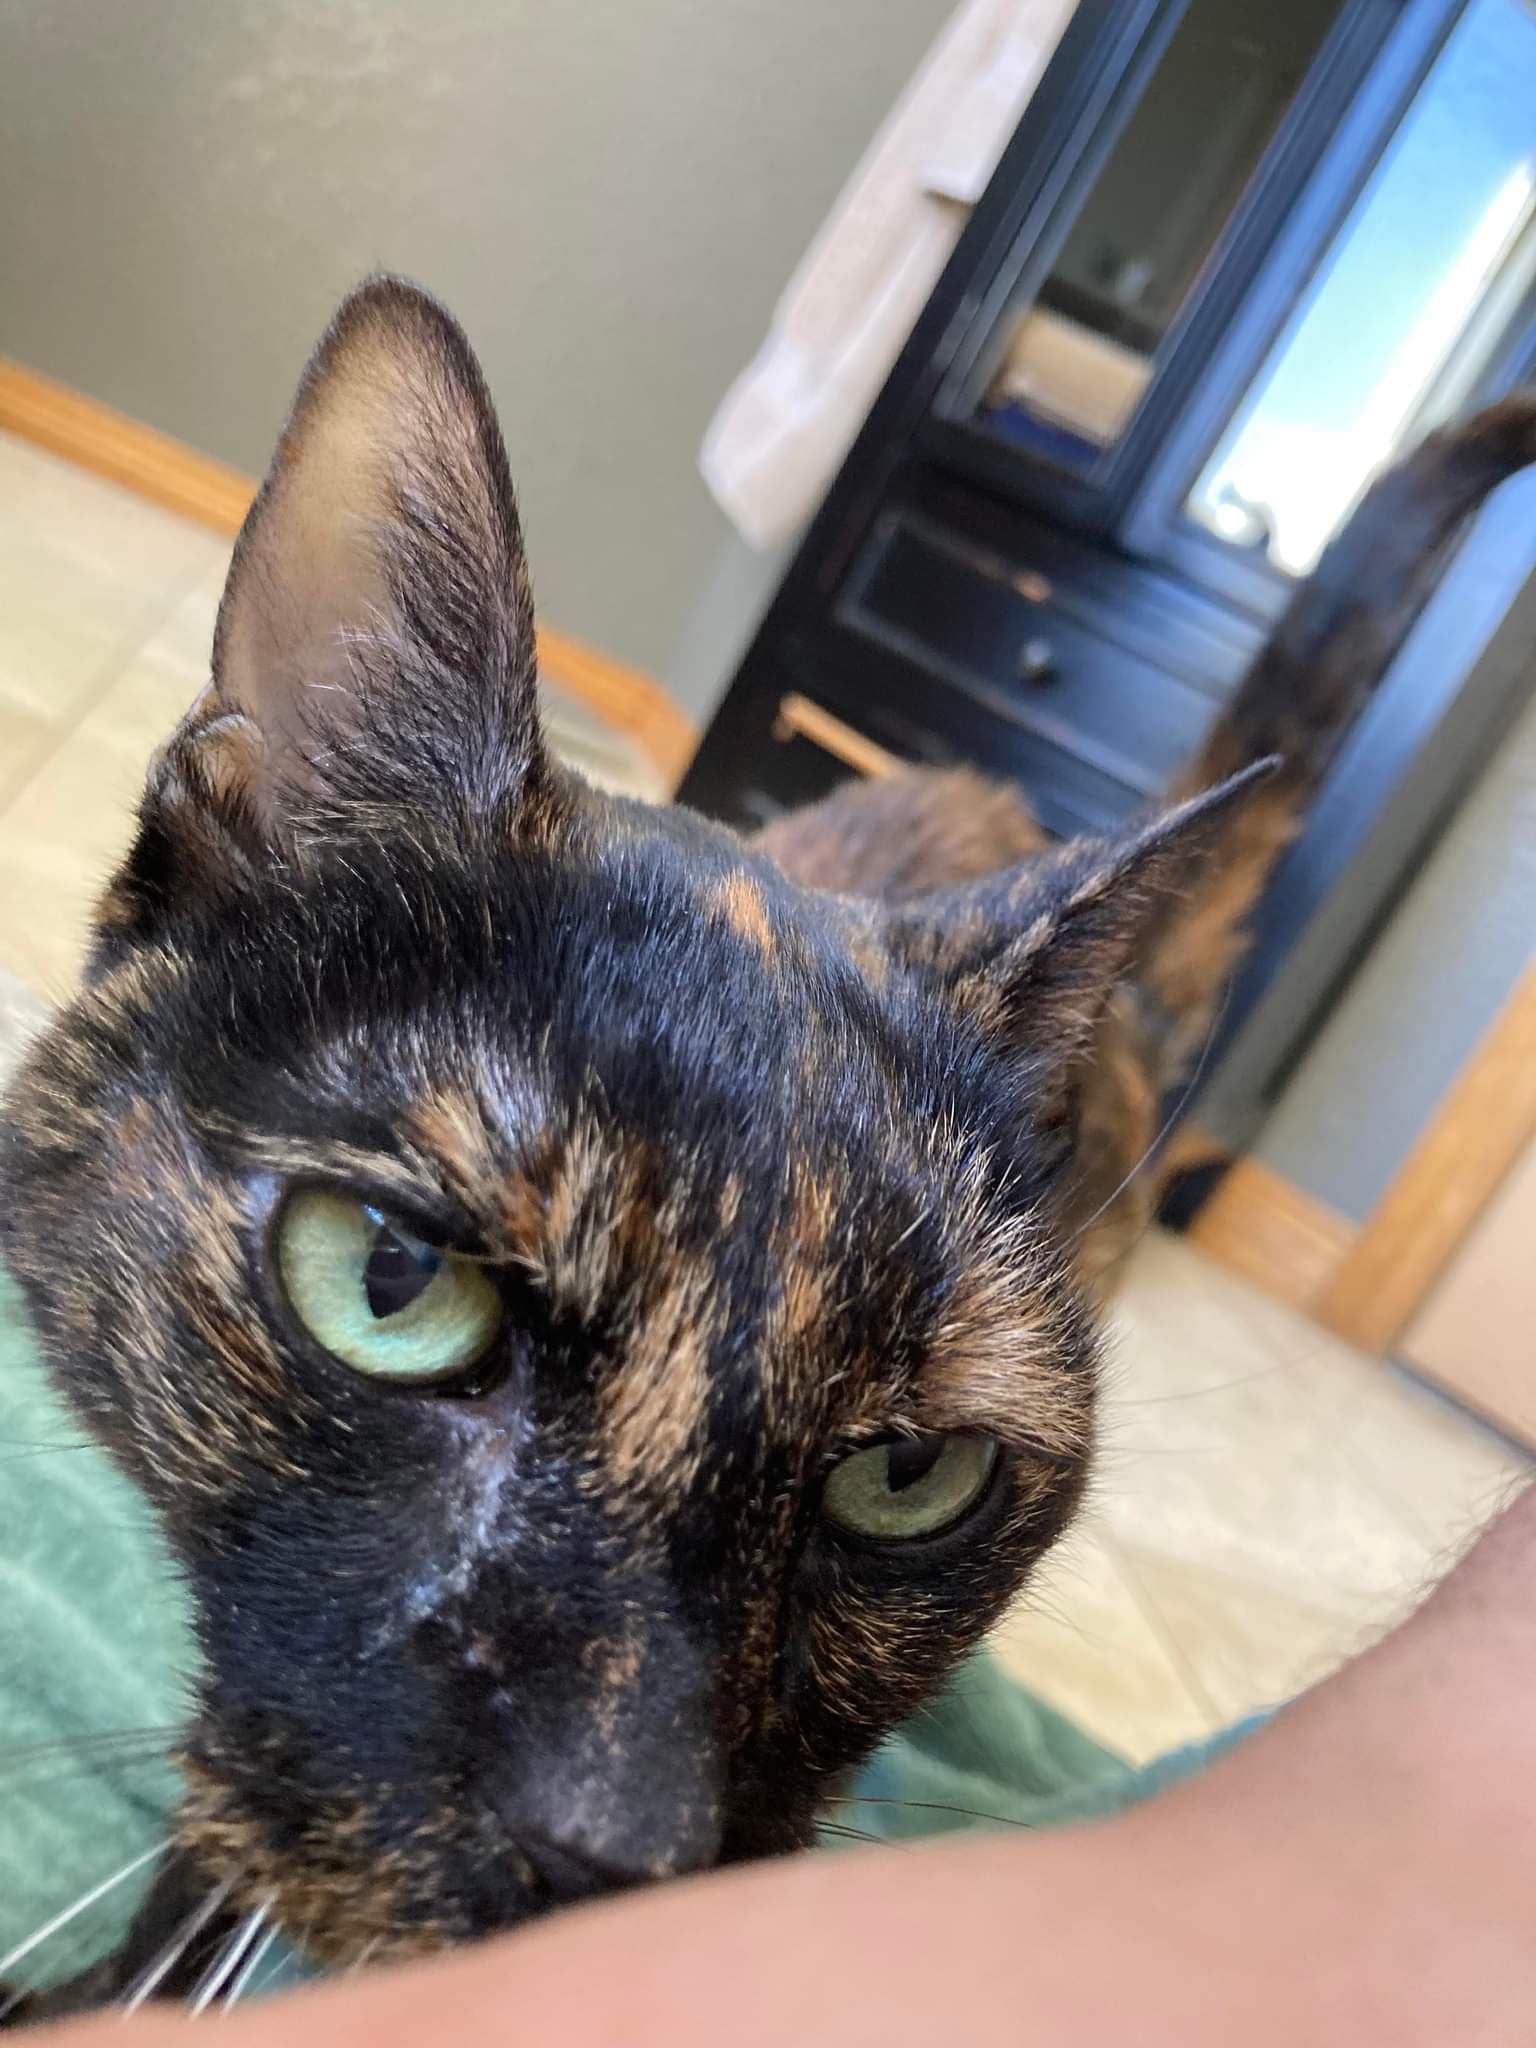 A tortie cat's face with big green eyes..